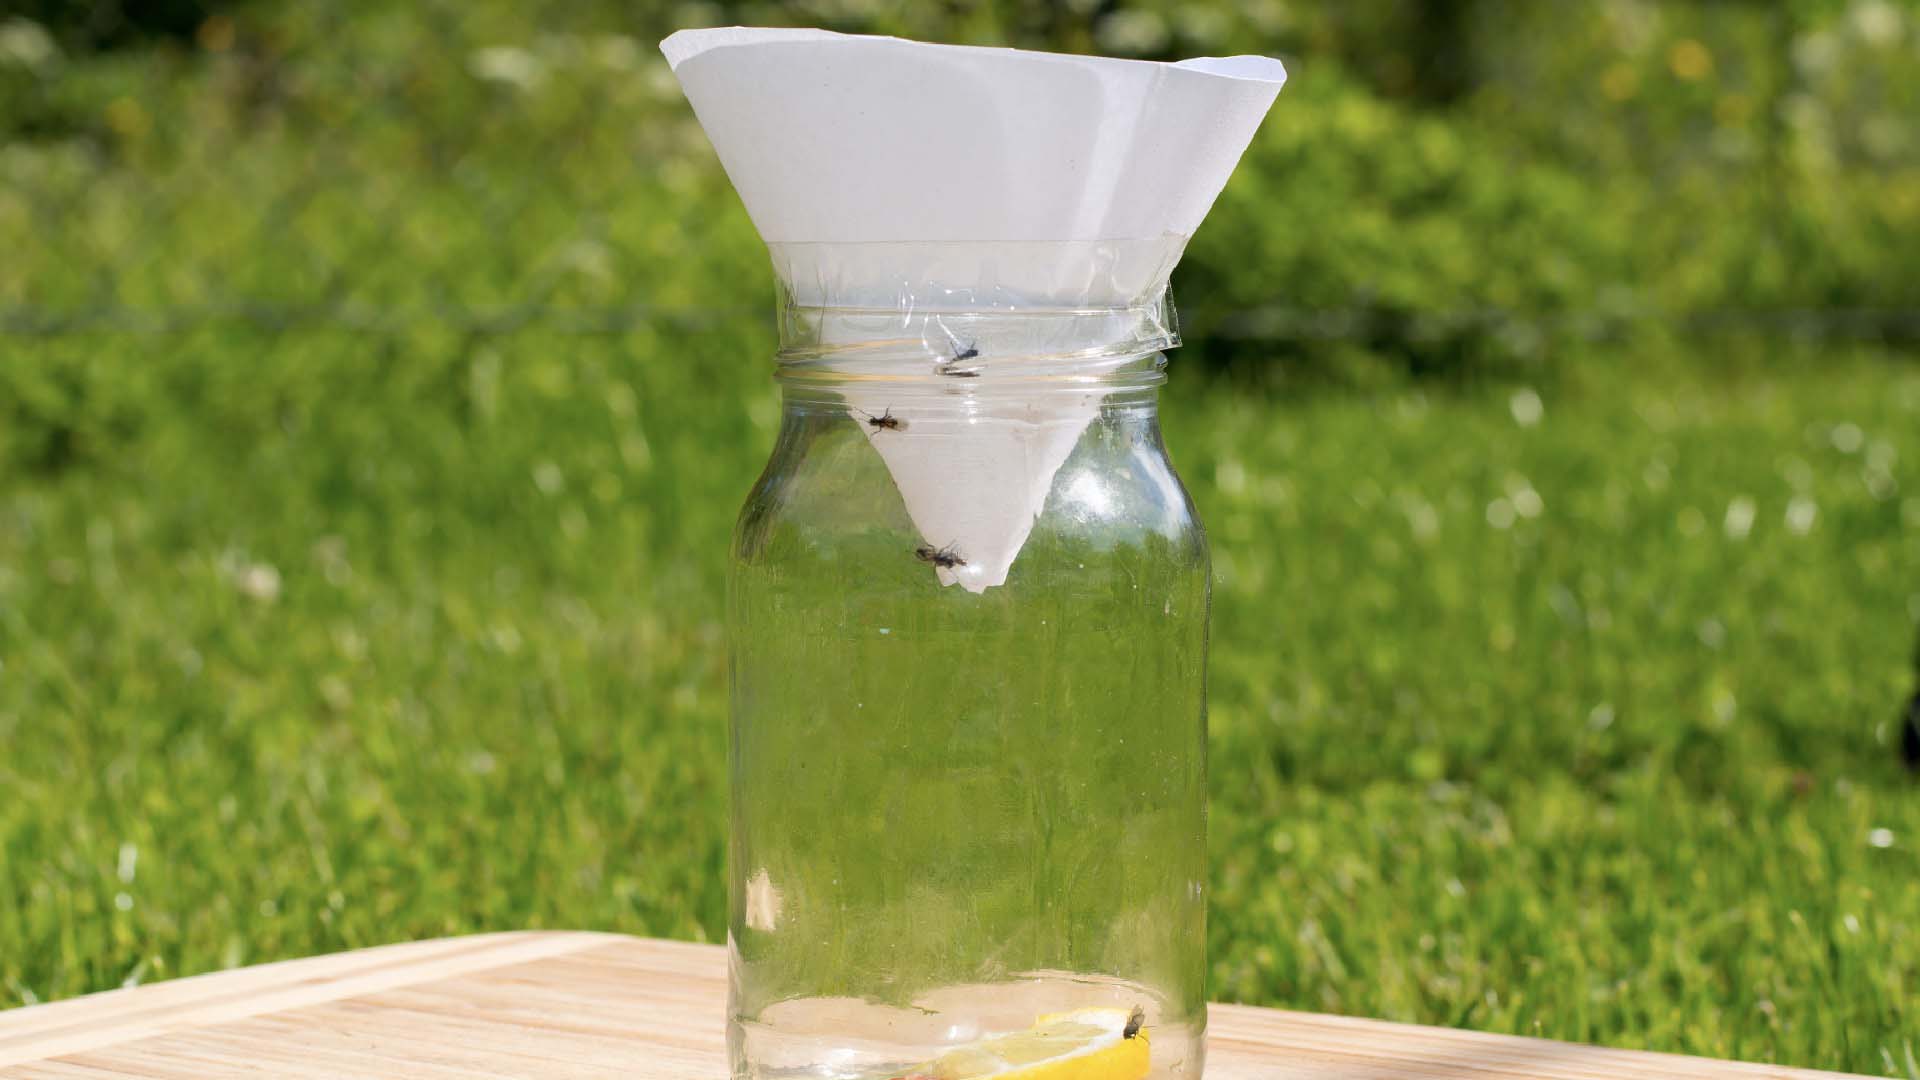 A jar with a cone of paper to funnel flies into the jar